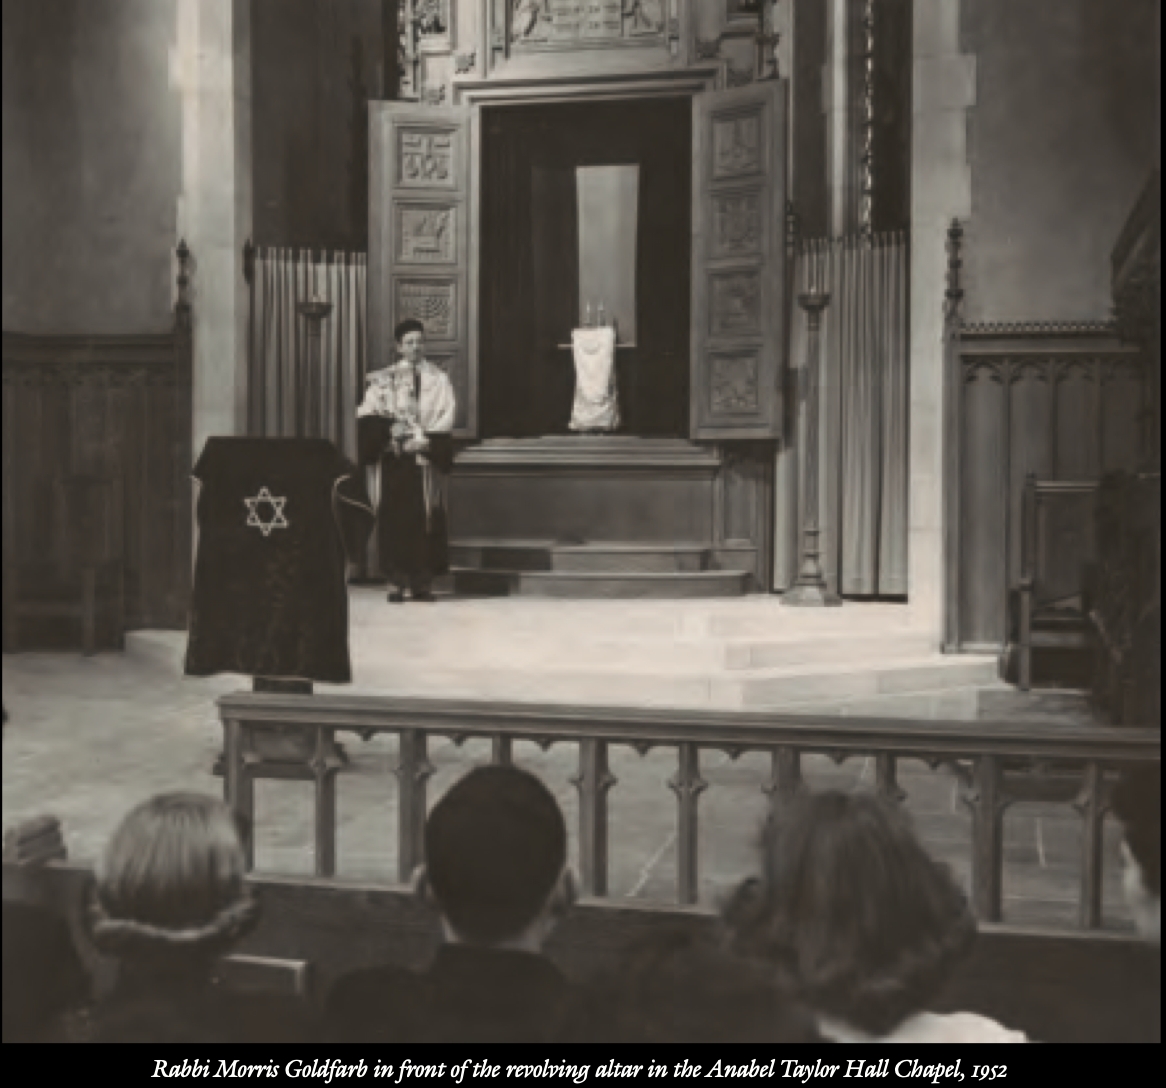 Rabbi Morris Goldfarb in front of the revolving altar in the Anabel Taylor Hall Chapel, 1952